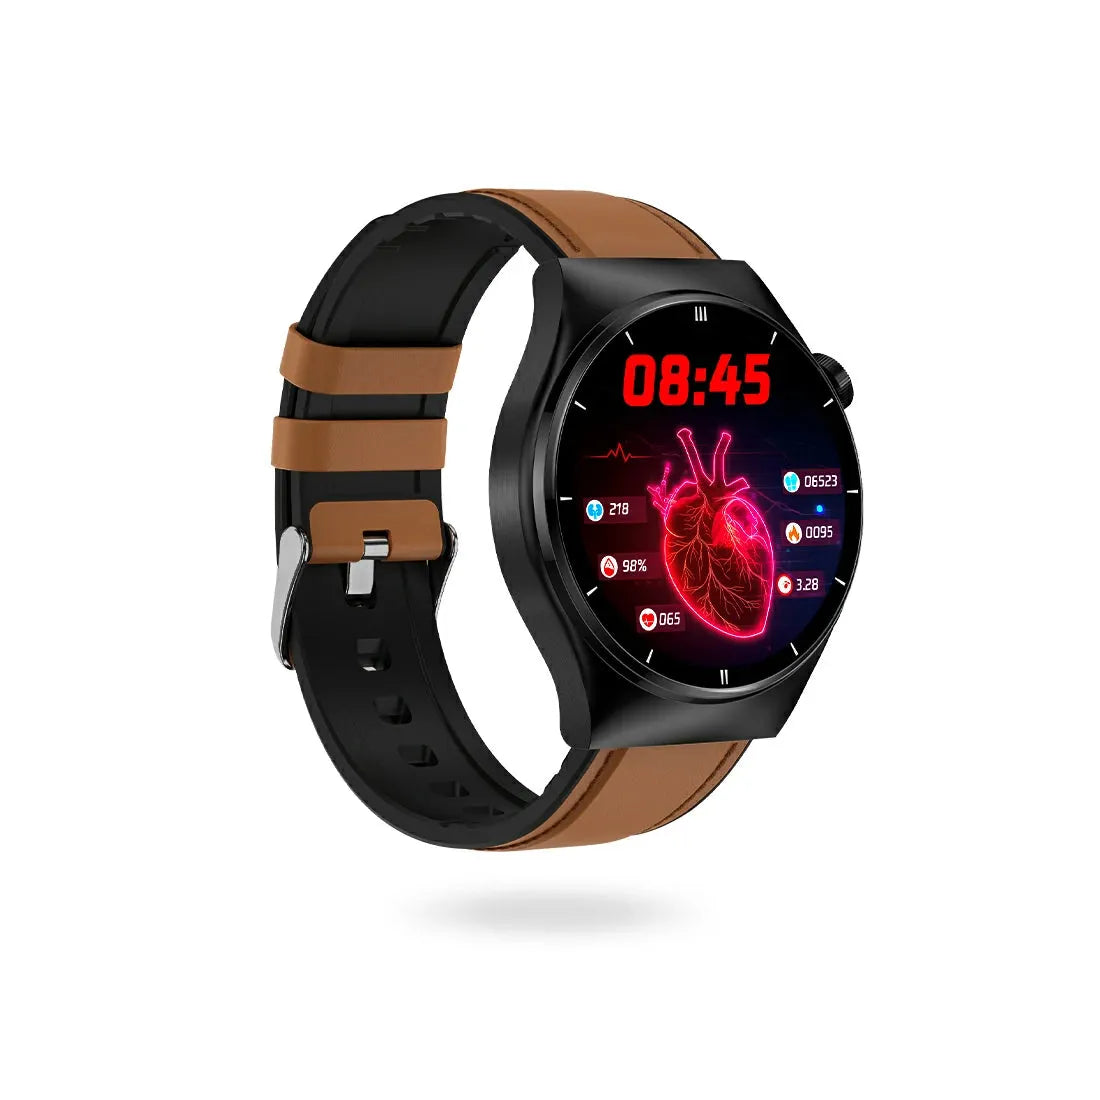 Tousains smartwatch H1 with brown leather strap